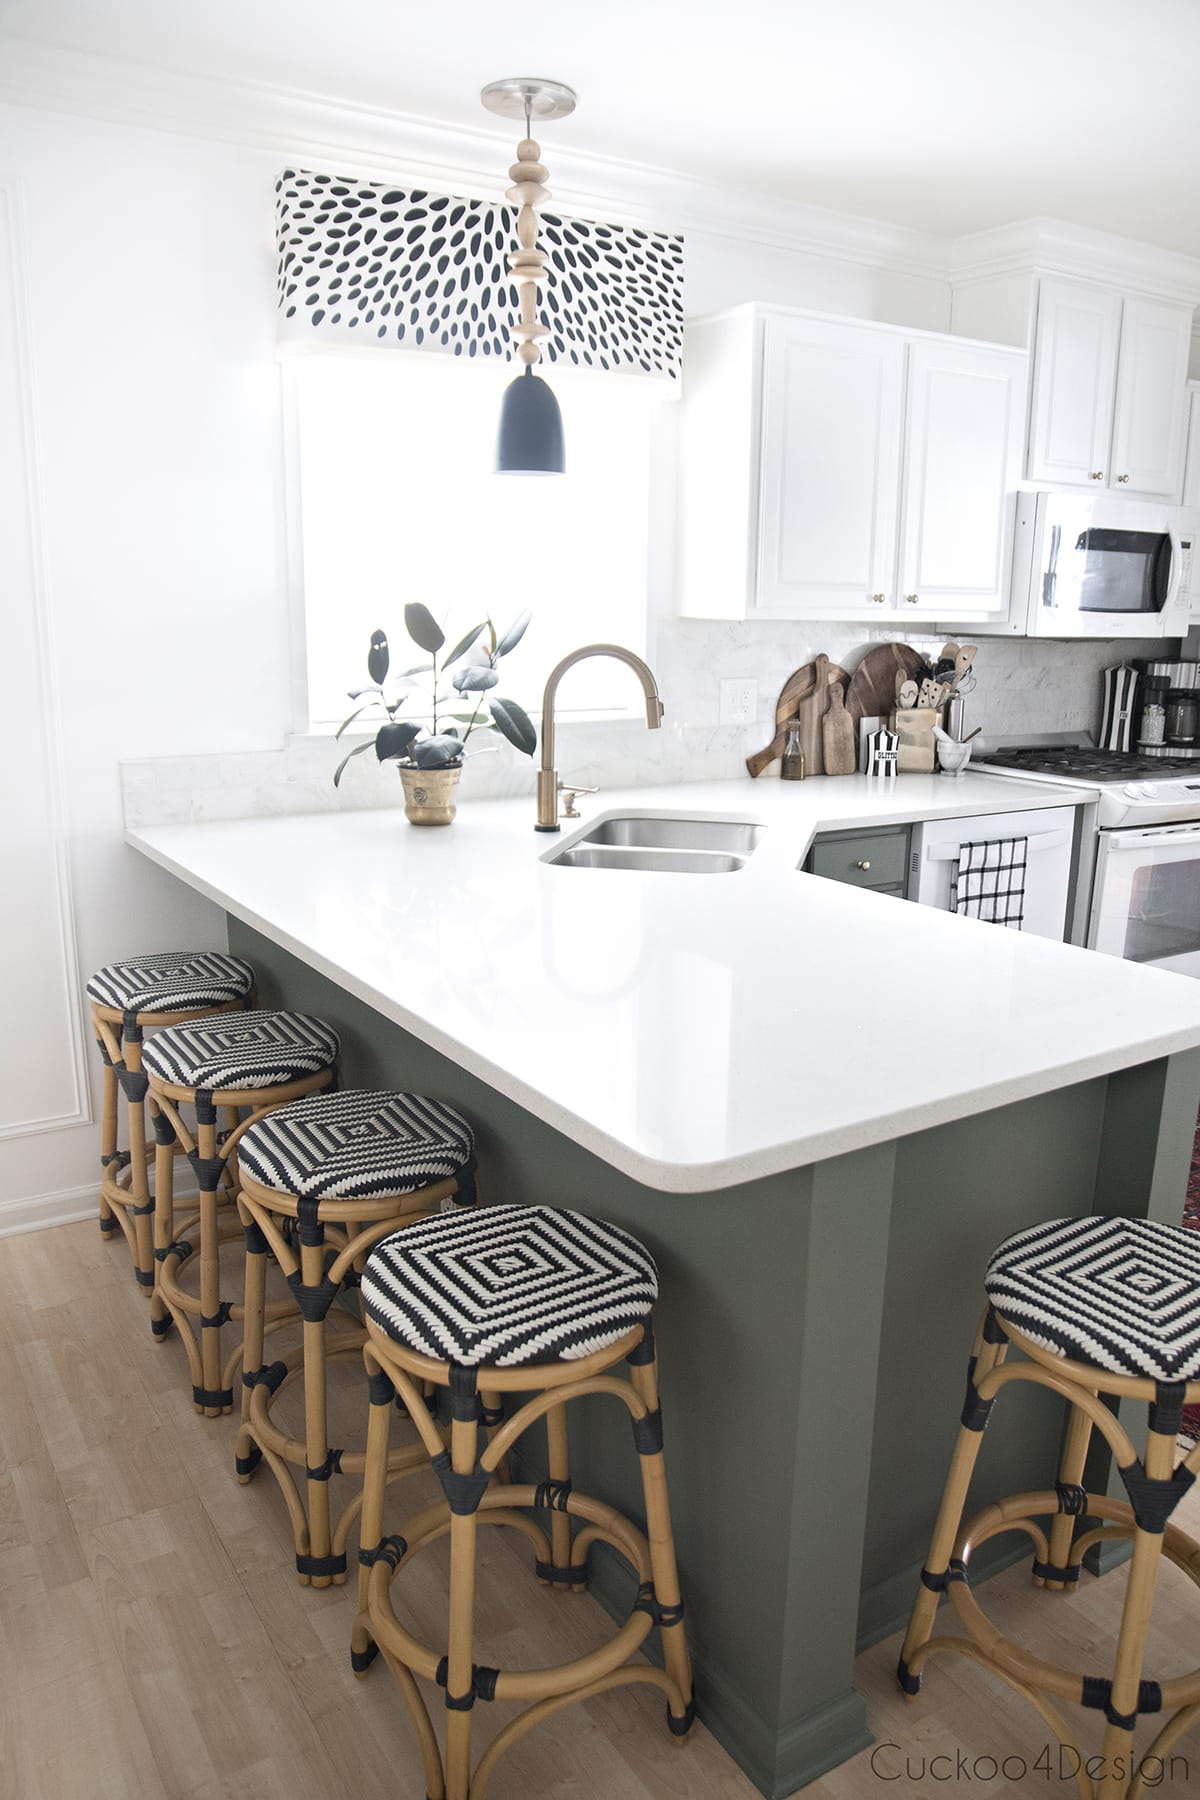 From white laminate kitchen to a green and white two-toned kitchen